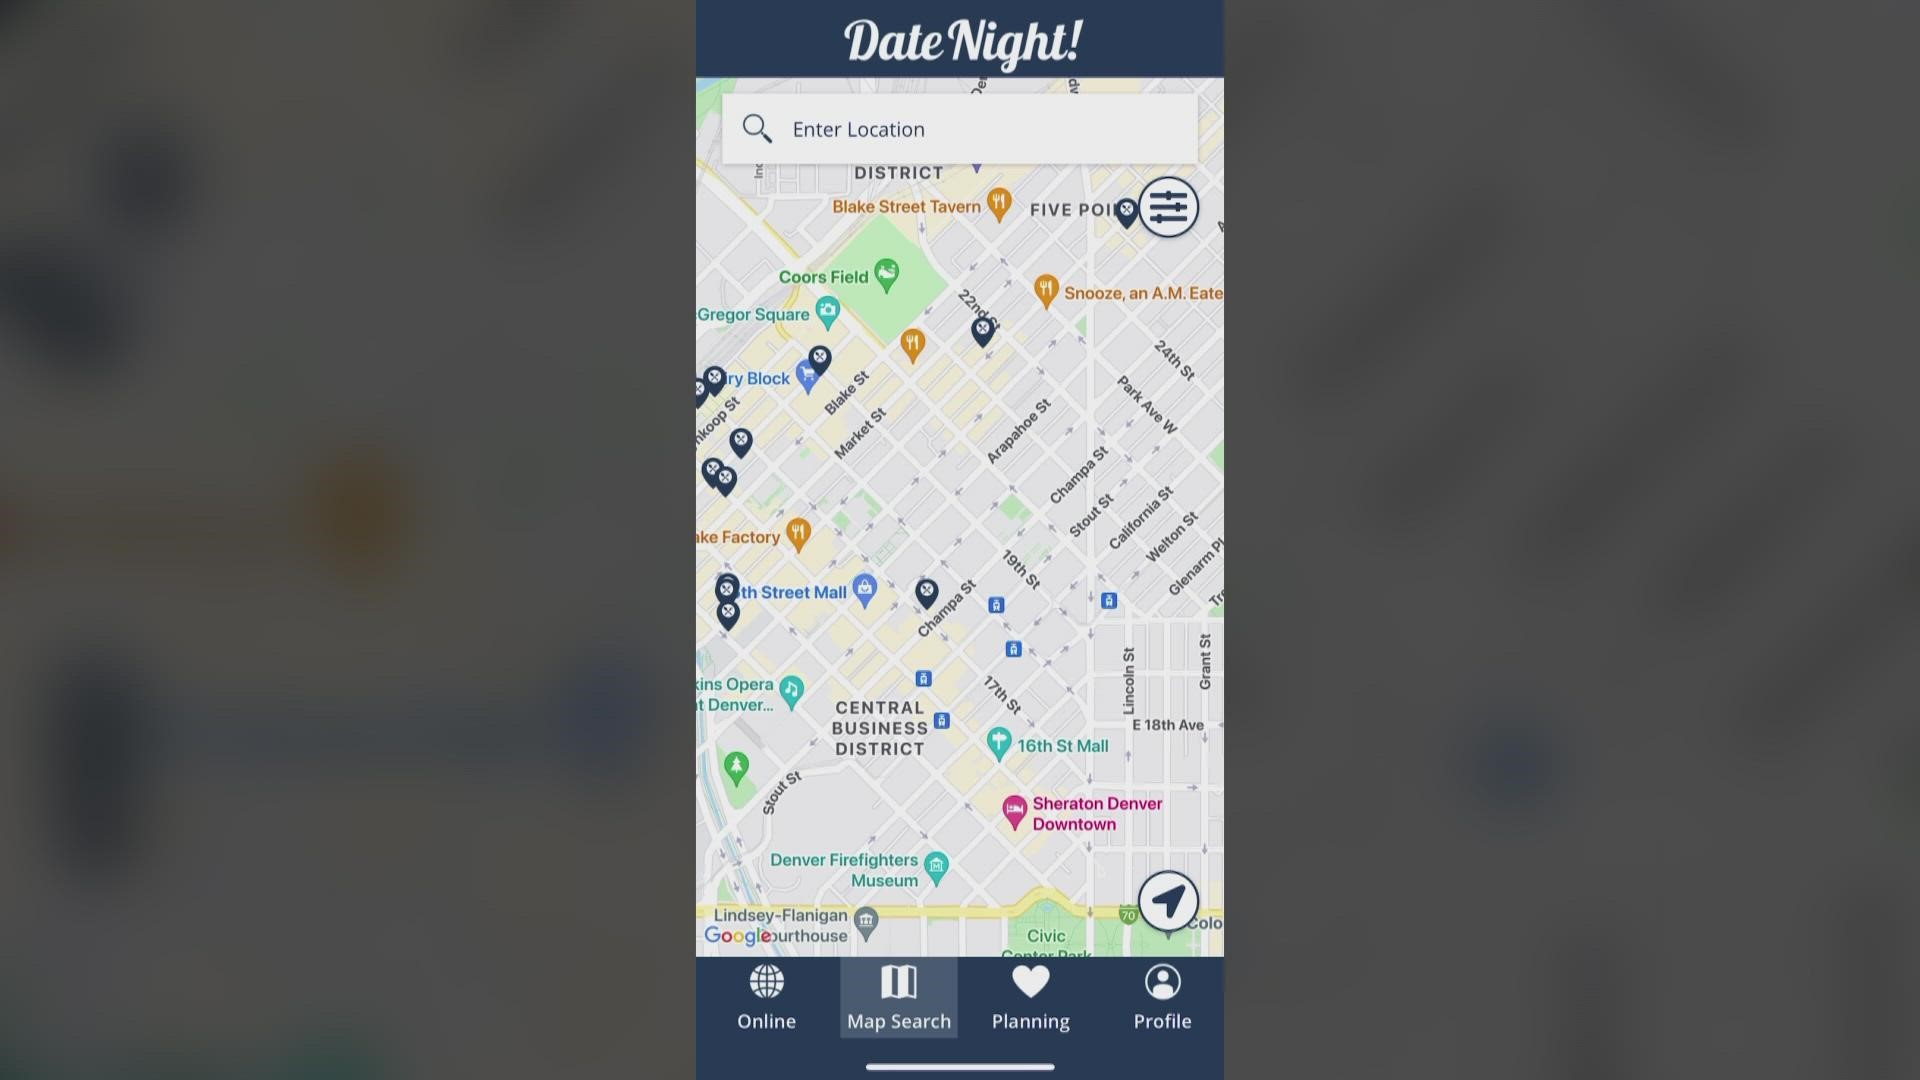 The app gives locals exclusive deals to restaurants, bars and experiences all across the state. Visit plandatenight.com to learn more!